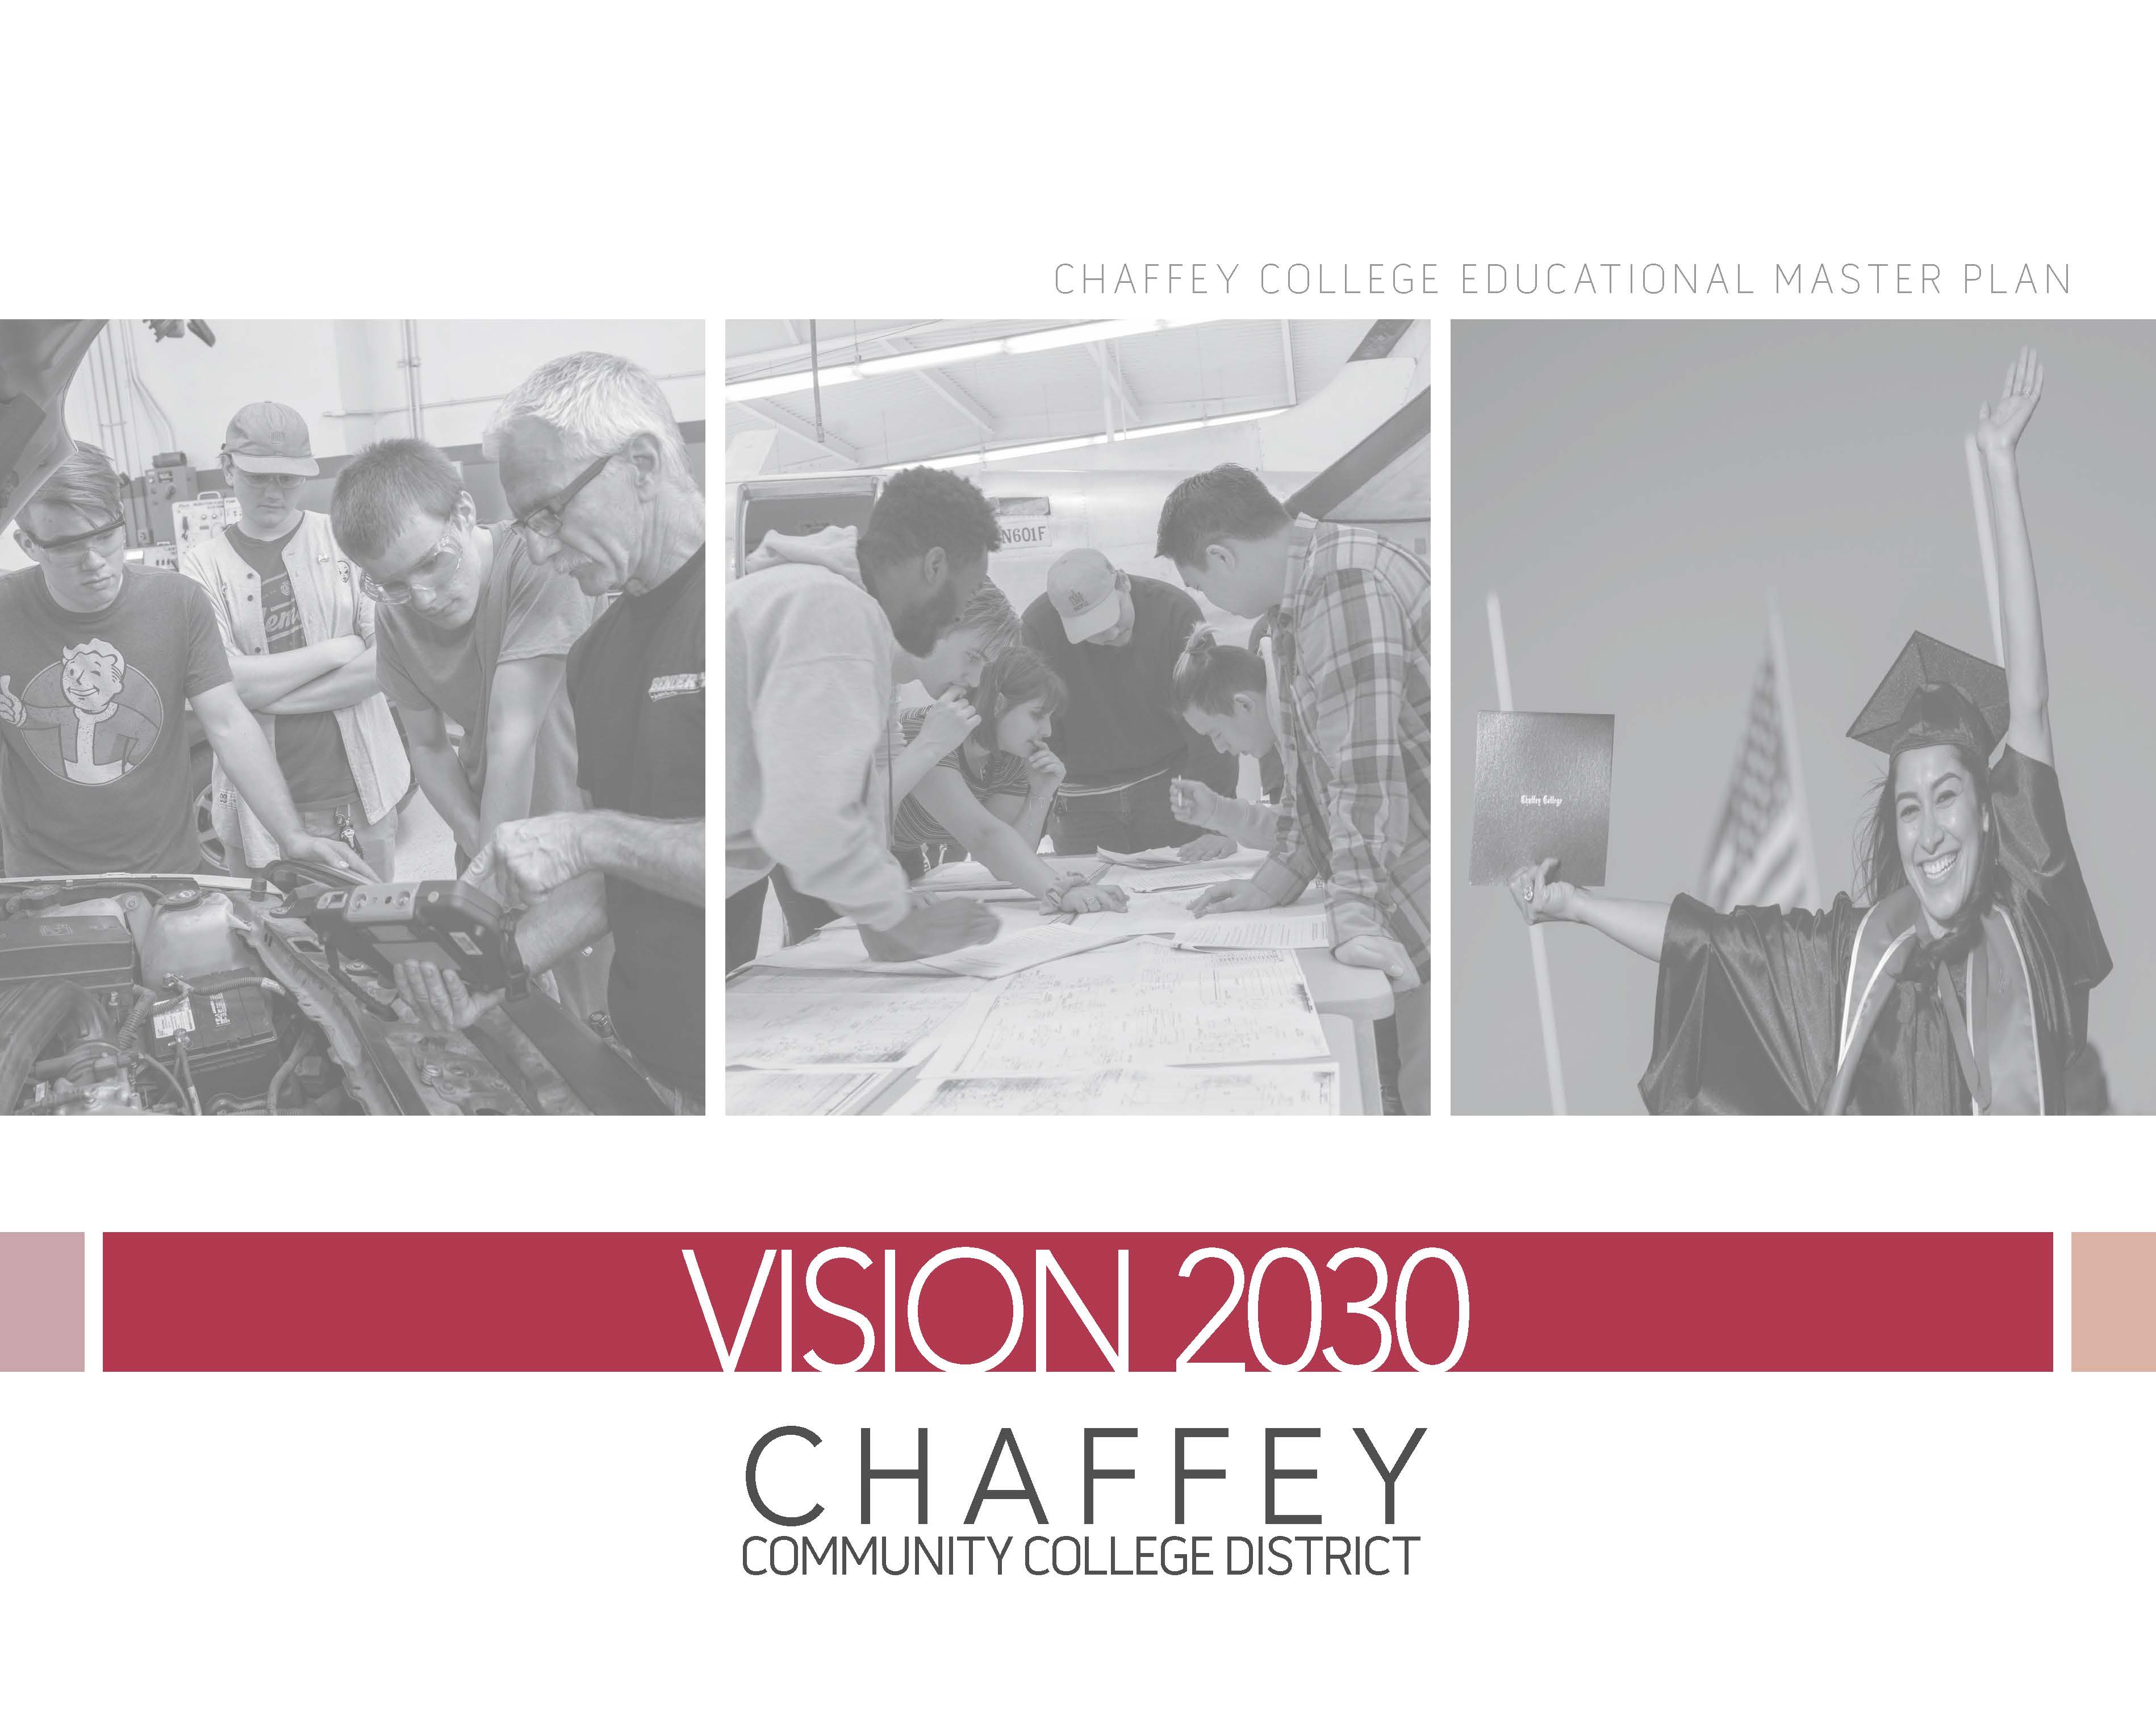 Vision 2030 student images